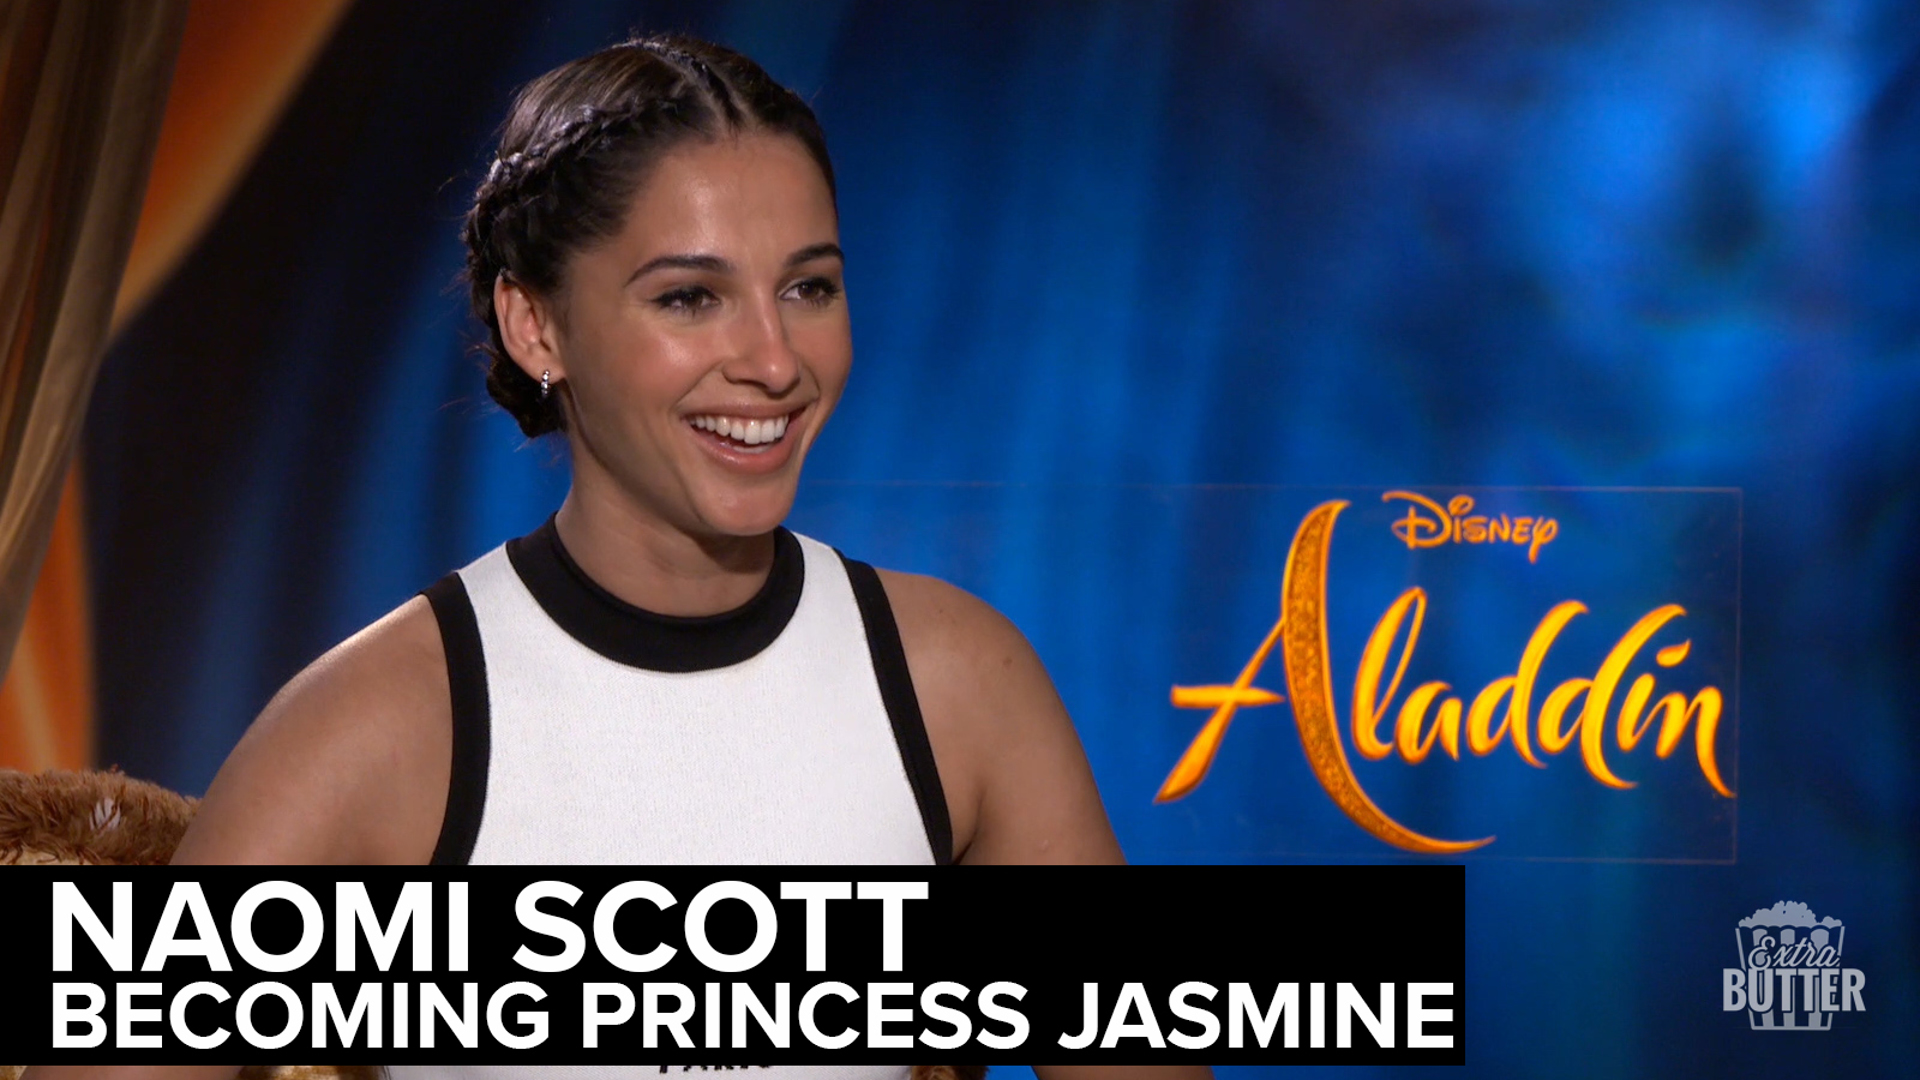 Naomi Scott shares her favorite parts of playing Princess Jasmine and what it was like to film the 'Whole New World' scene and the new song called 'Speechless.'